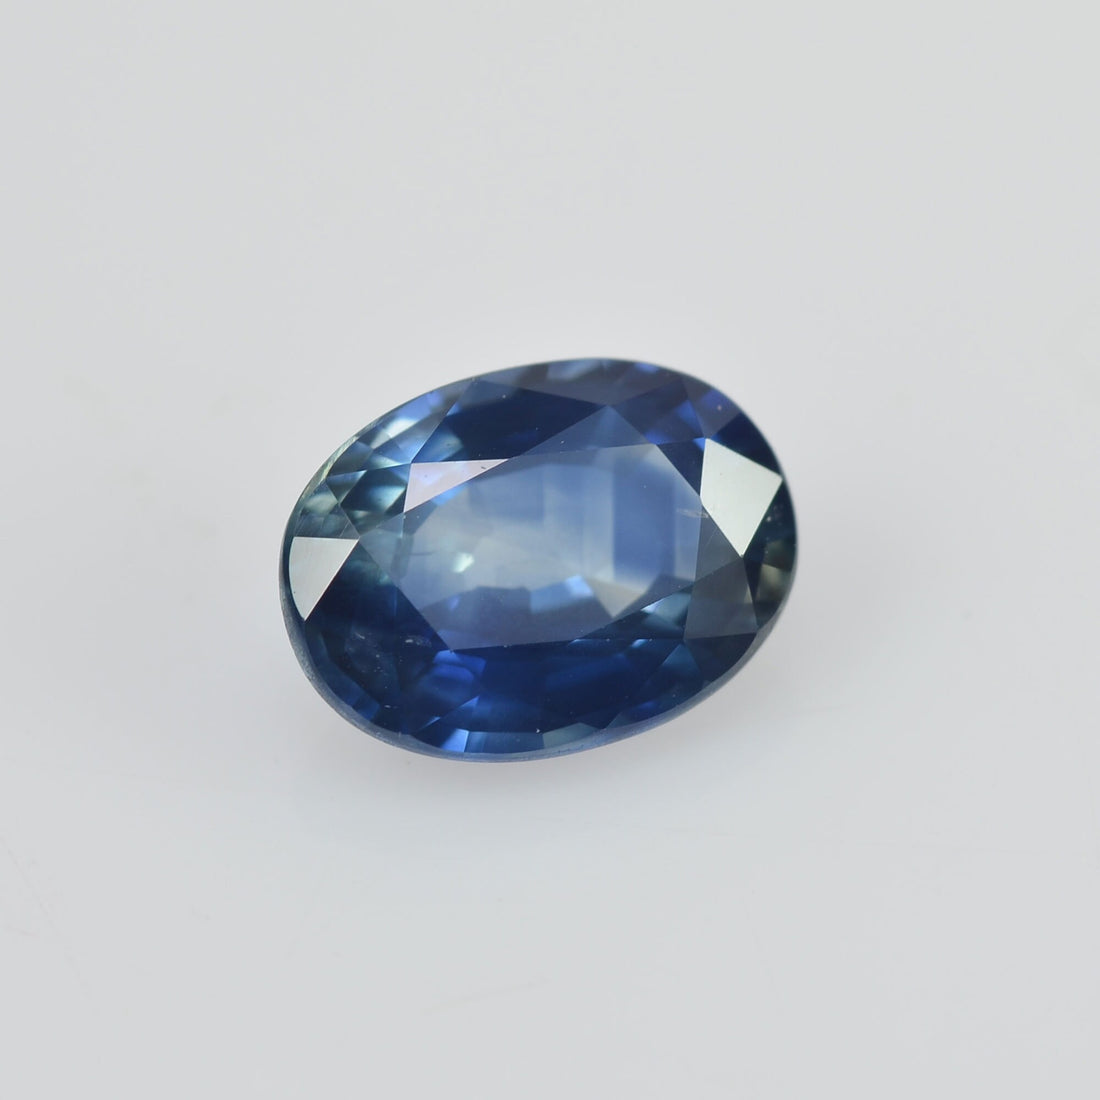 1.01 cts Natural Blue Green Teal Sapphire Loose Gemstone Oval Cut